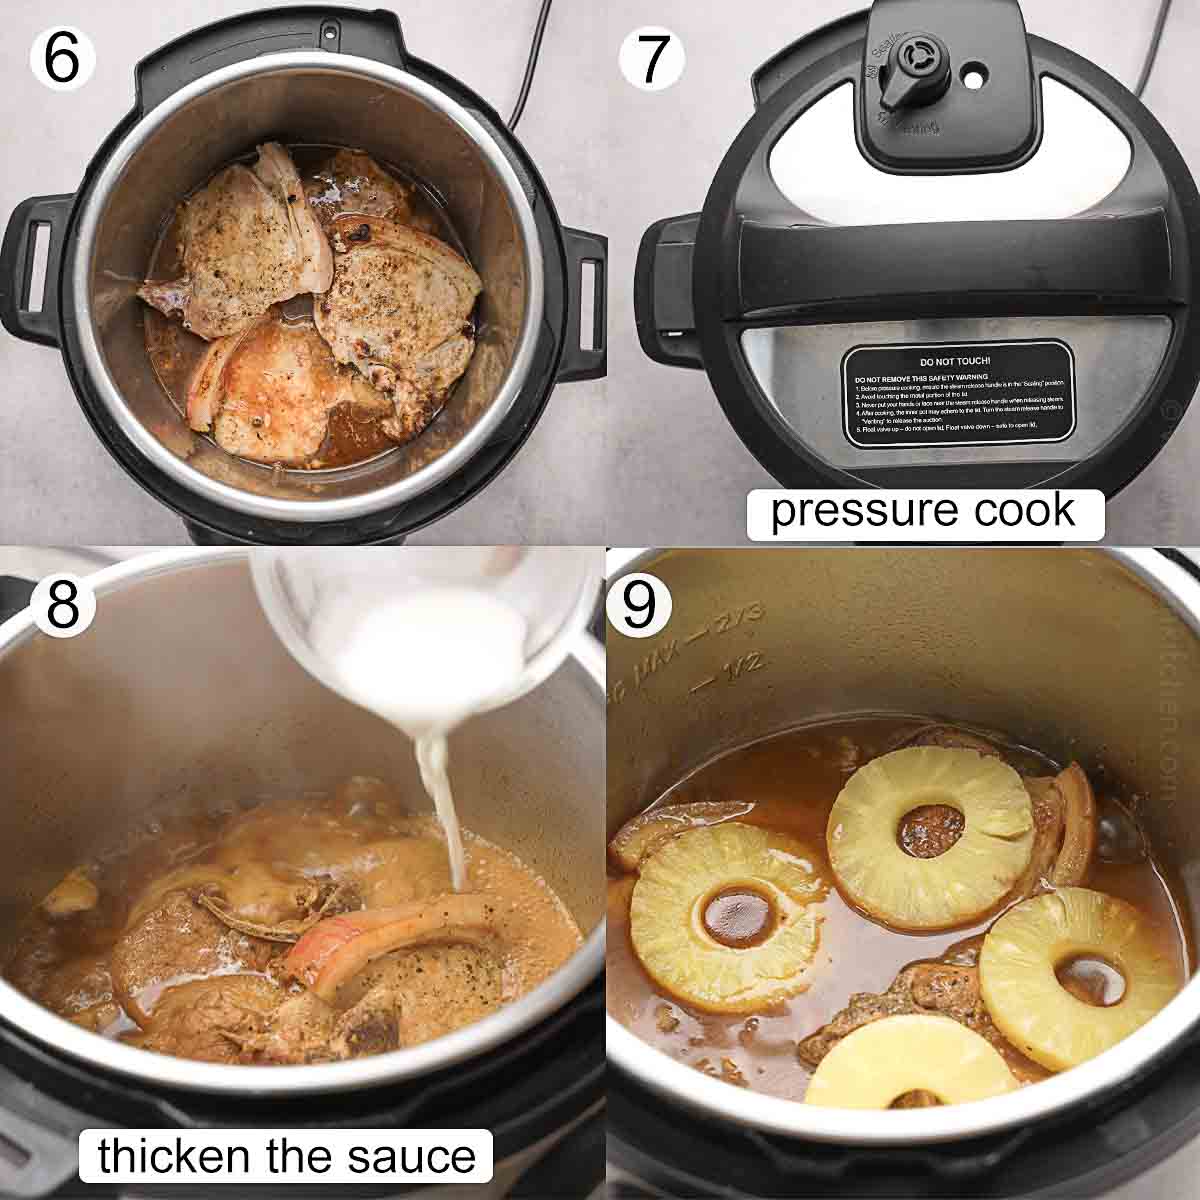 step-by-step process on how to cook pork chops and pineapples in an Instant pot pressure cooker.